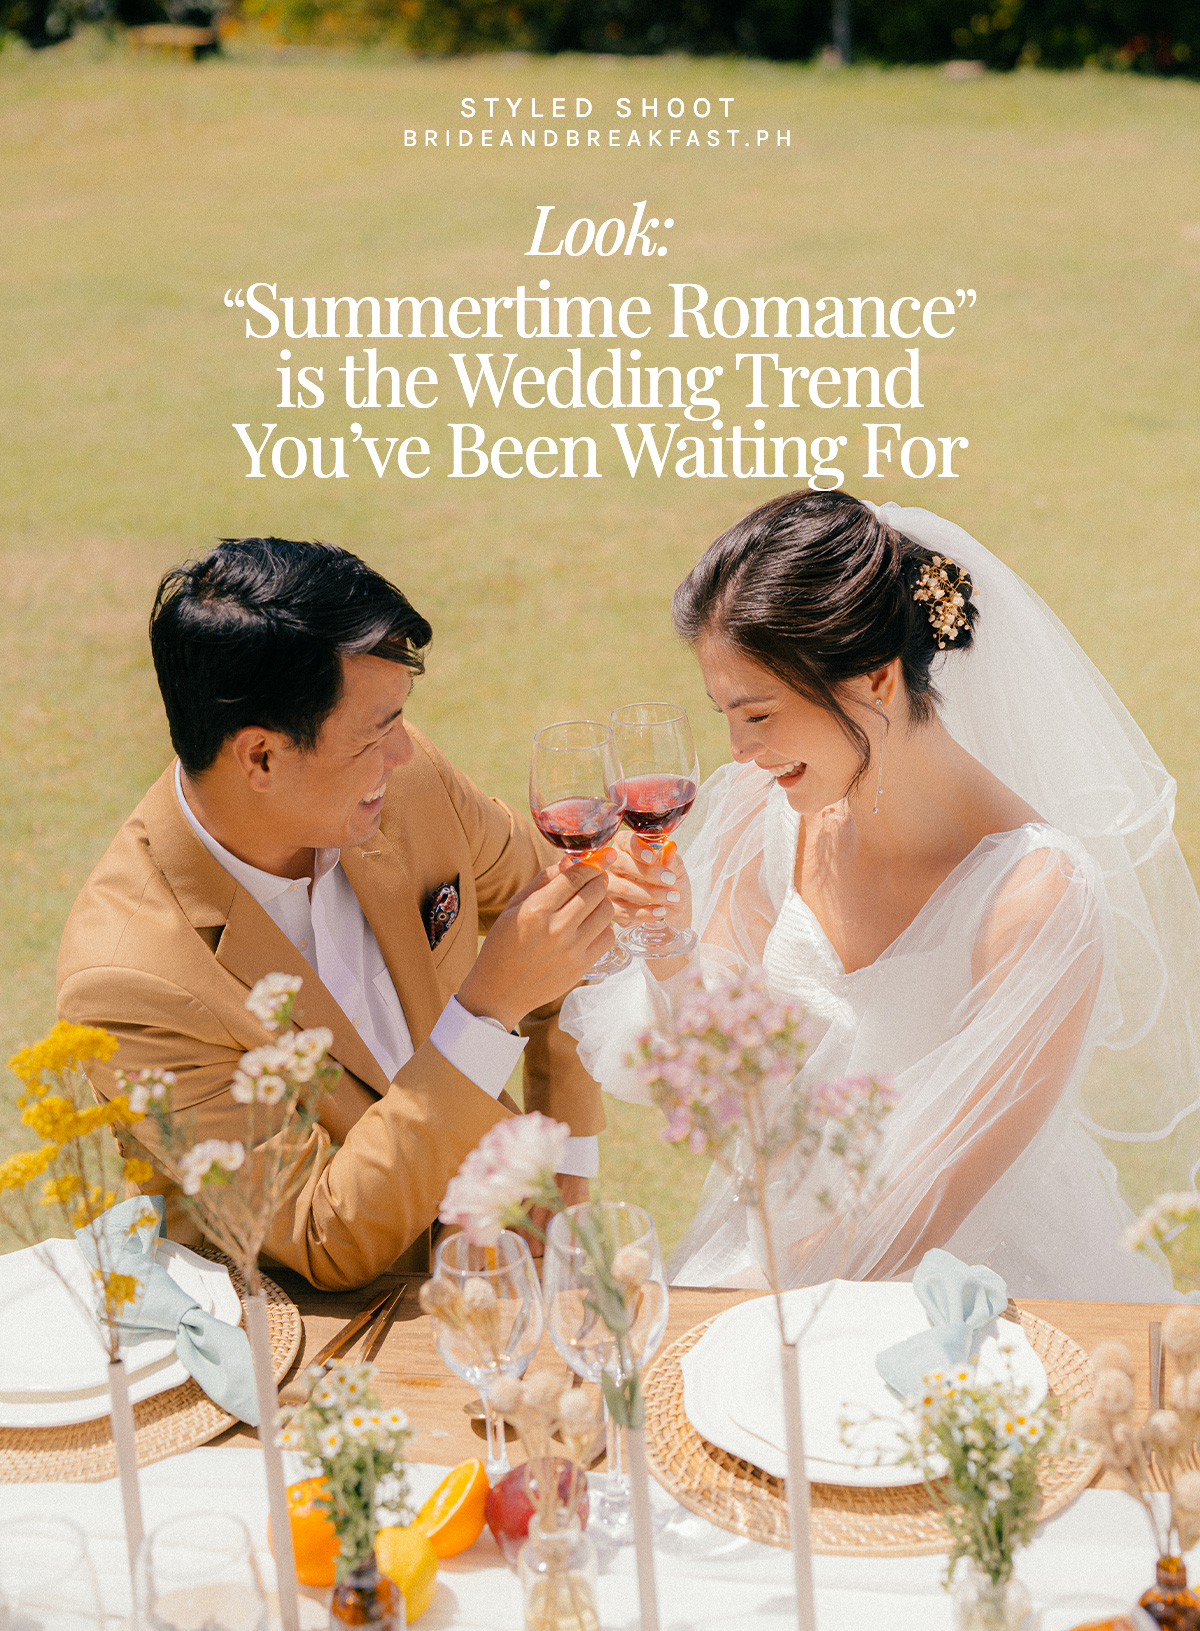 Look: Summertime Romance is the Wedding Trend You've Been Waiting For